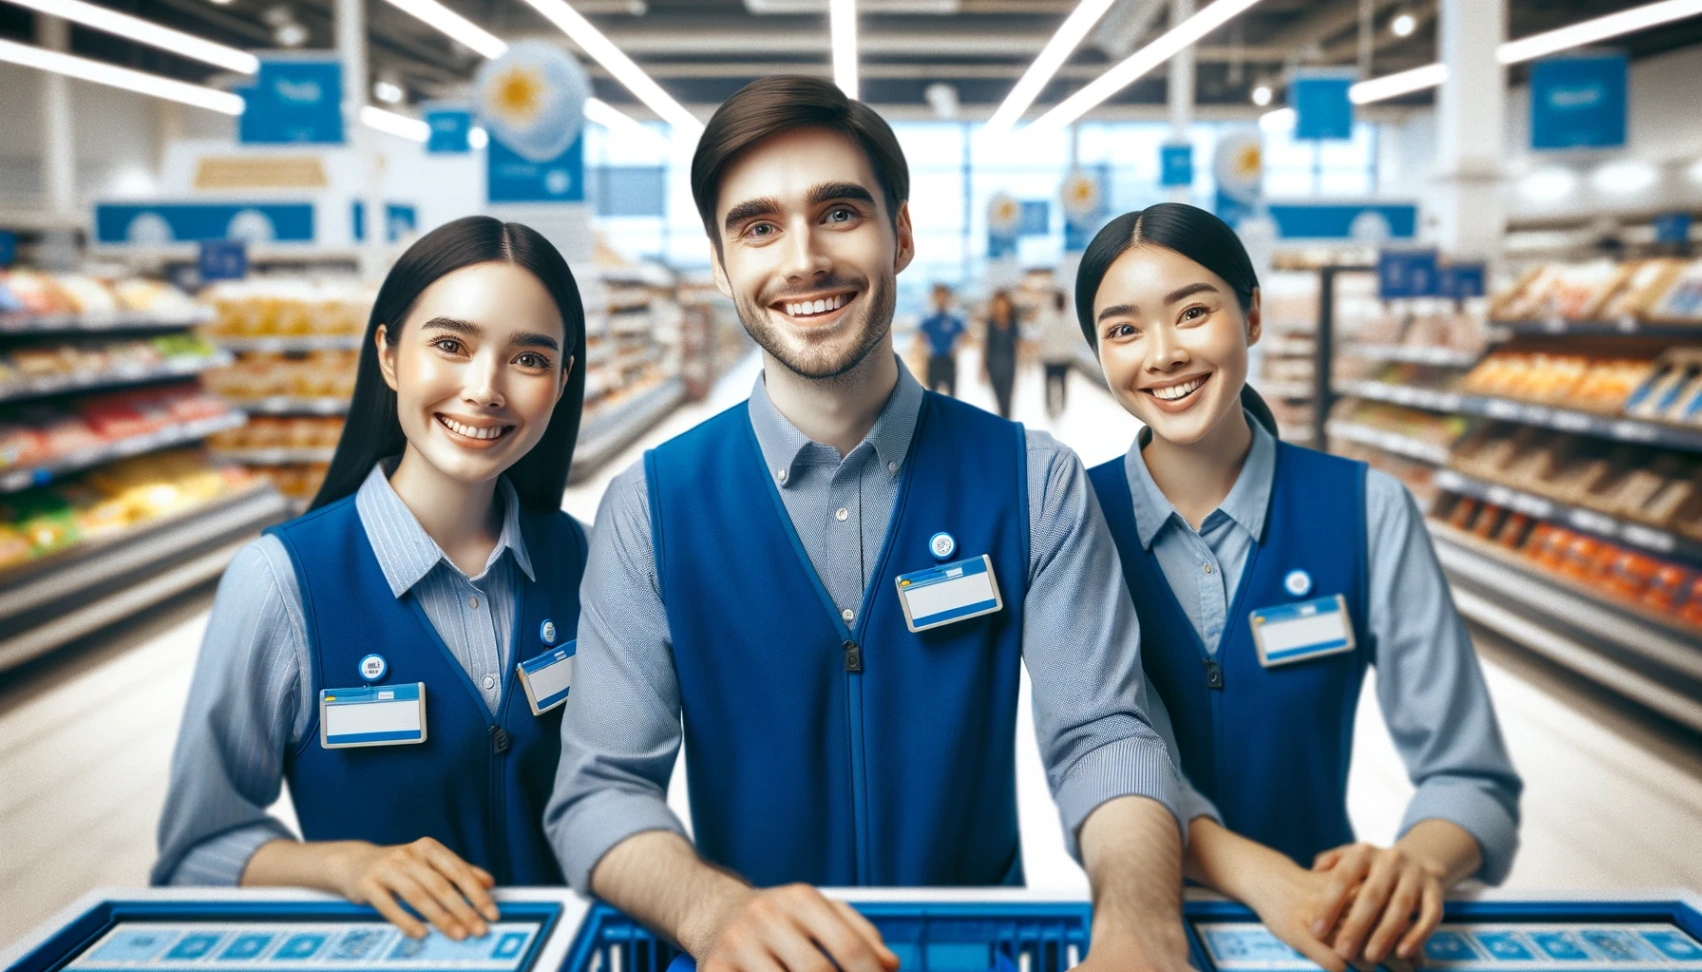 Carrefour is Hiring - Learn How to Apply for a Carrefour Jobs